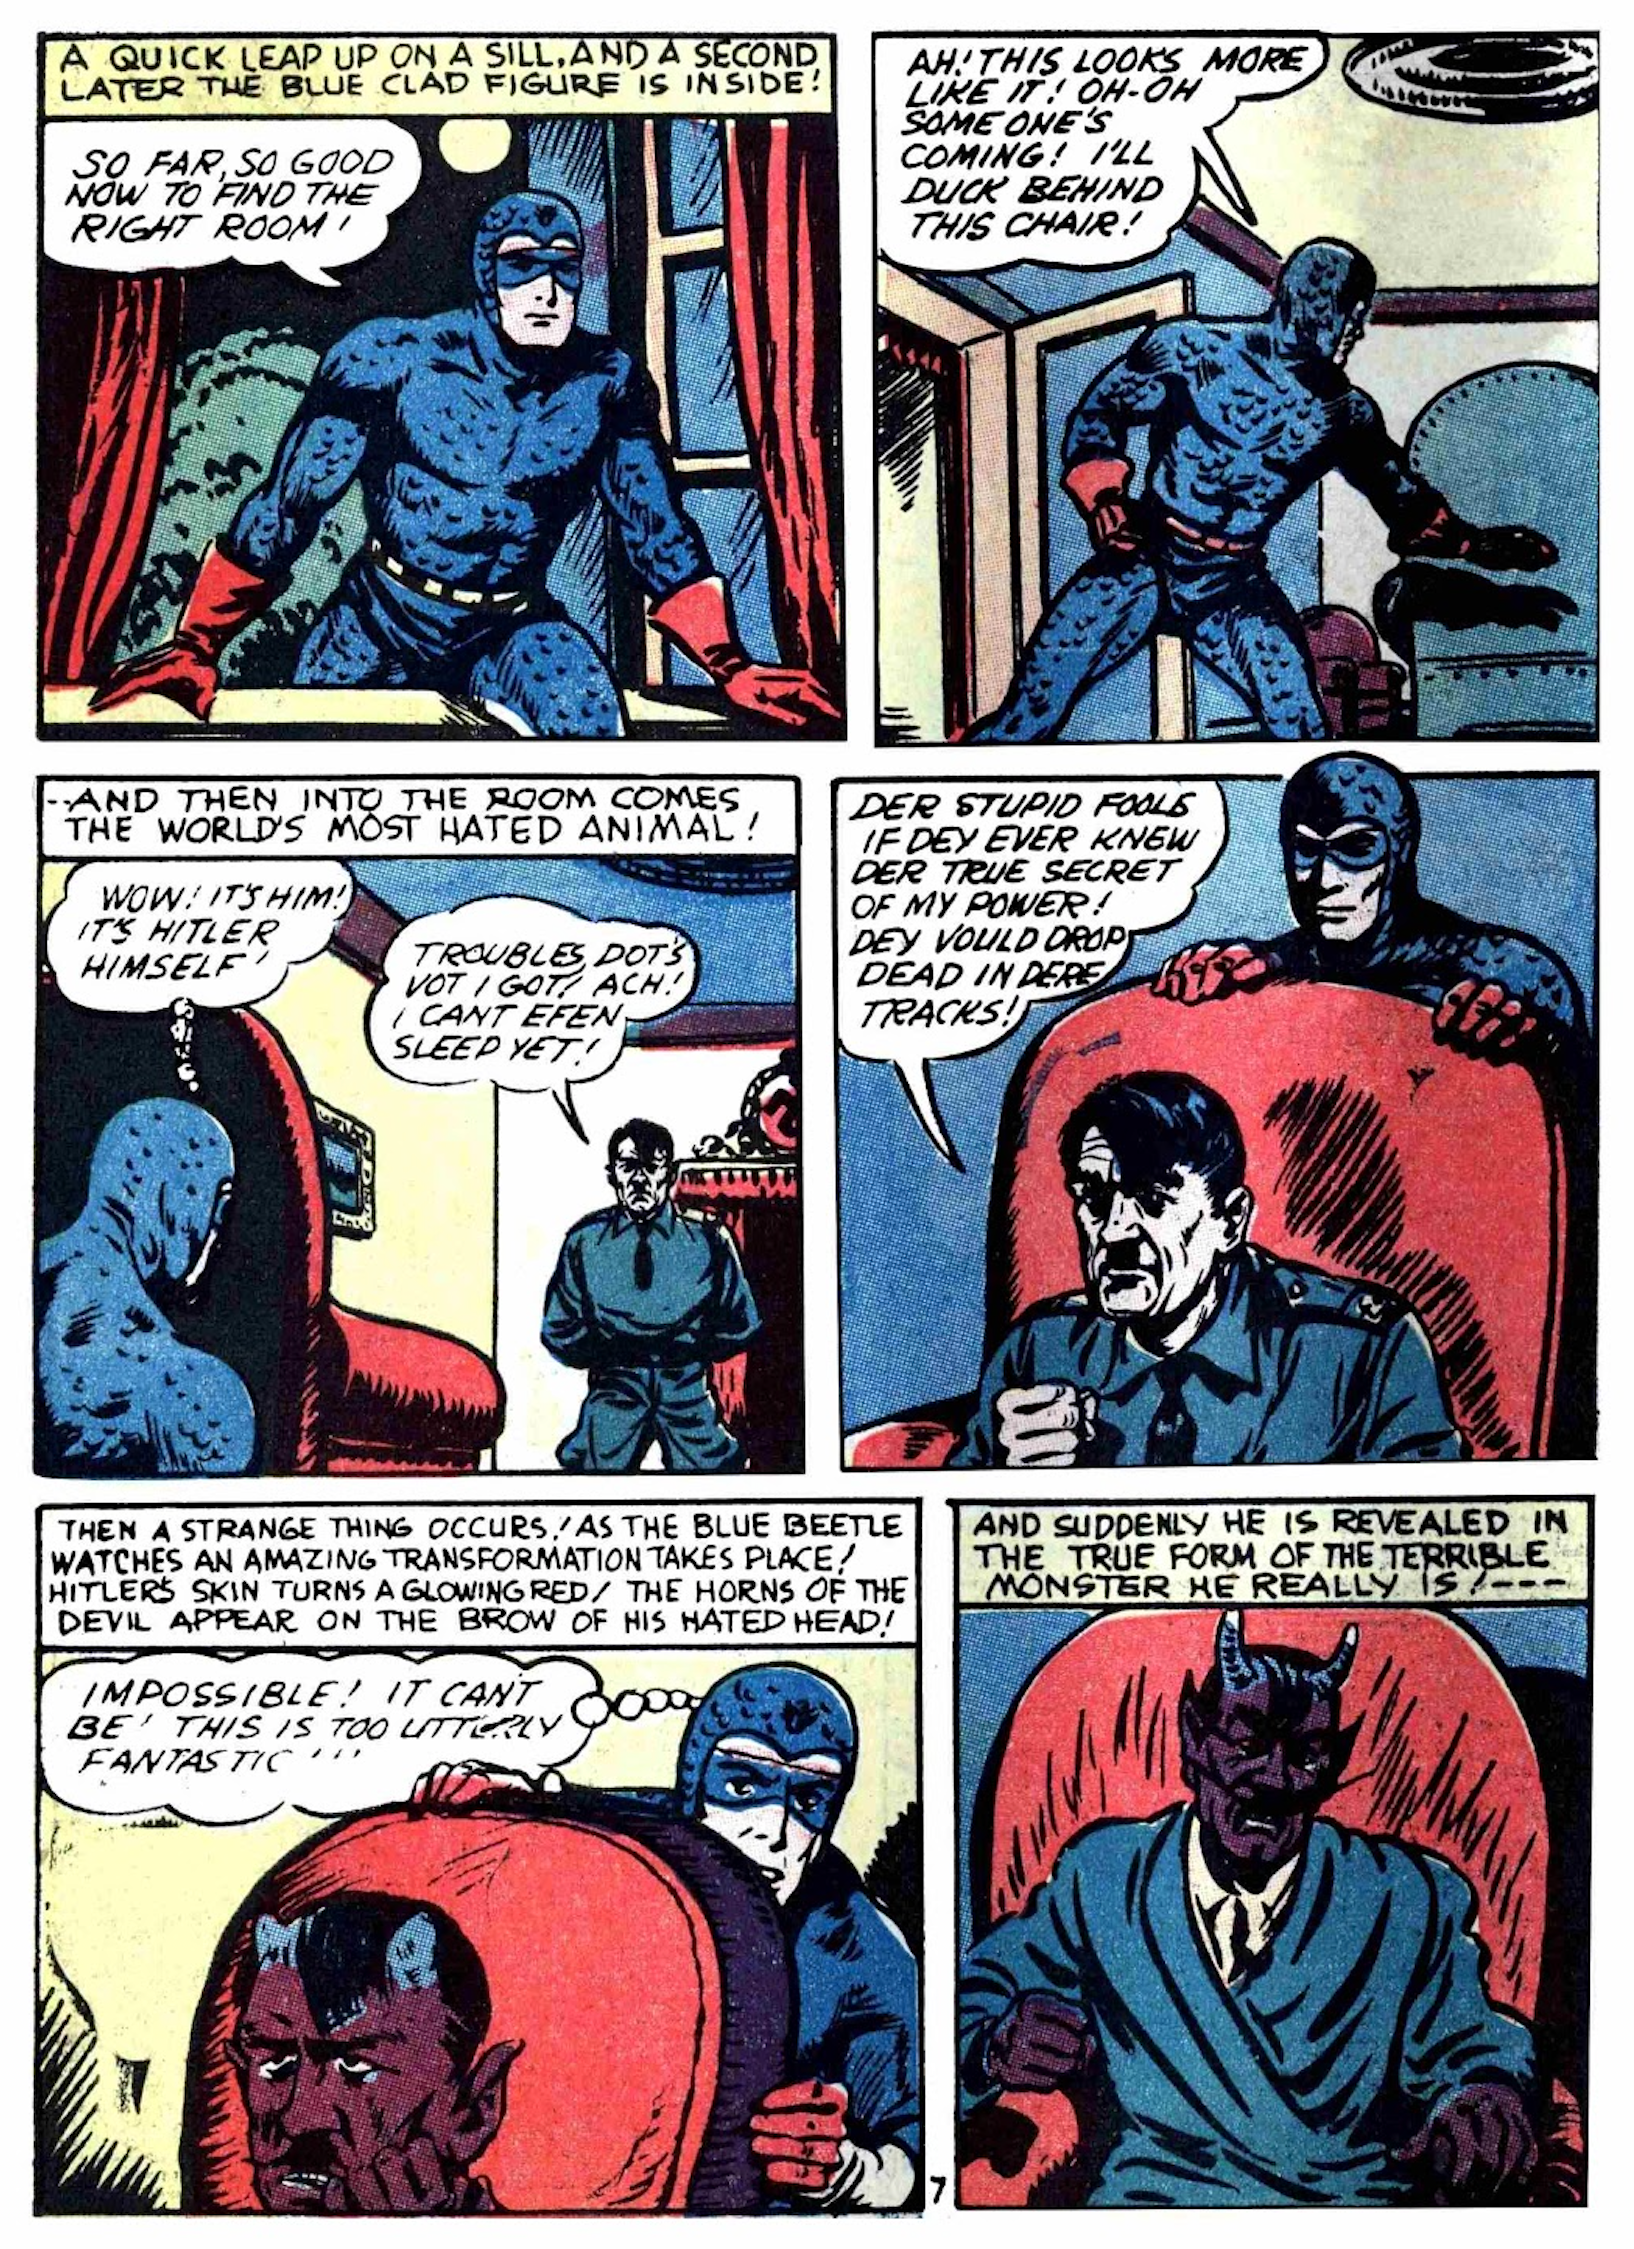 Blue Beetle Turned Captain America’s Most Iconic Win into a Fever Dream